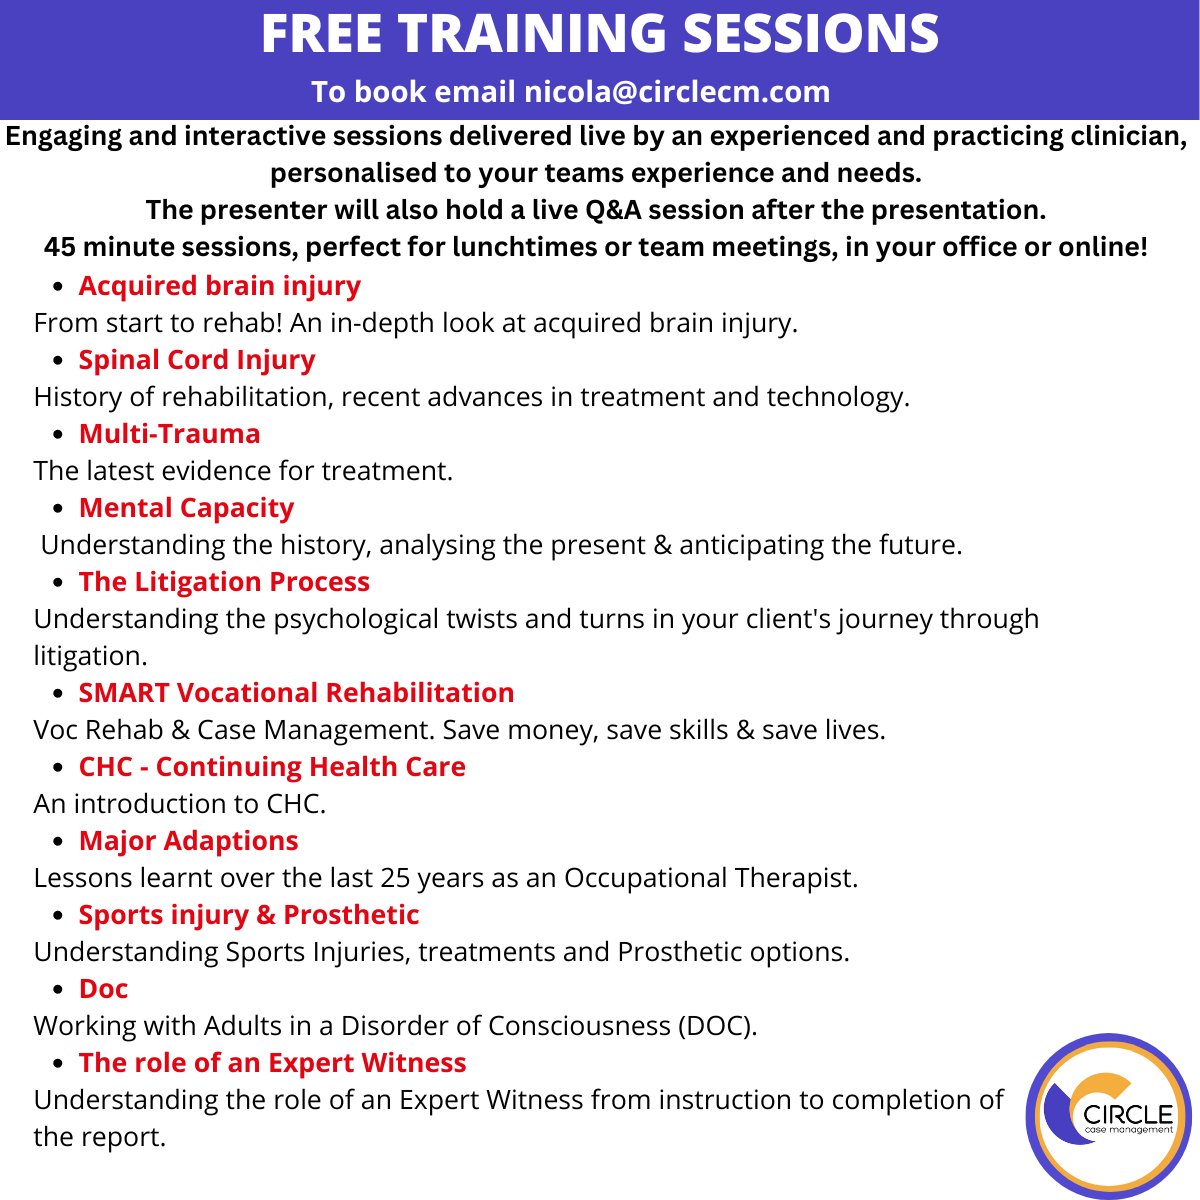 Our free training sessions are delivered by a practicing clinician, in your office or virtually! 45 minutes long: perfect for lunchtime or team meetings. please contact nicola@circlecm.com #CircleCM #Training #ClinicalNegligence #MedicalNegligence #PersonalInjury #CoP